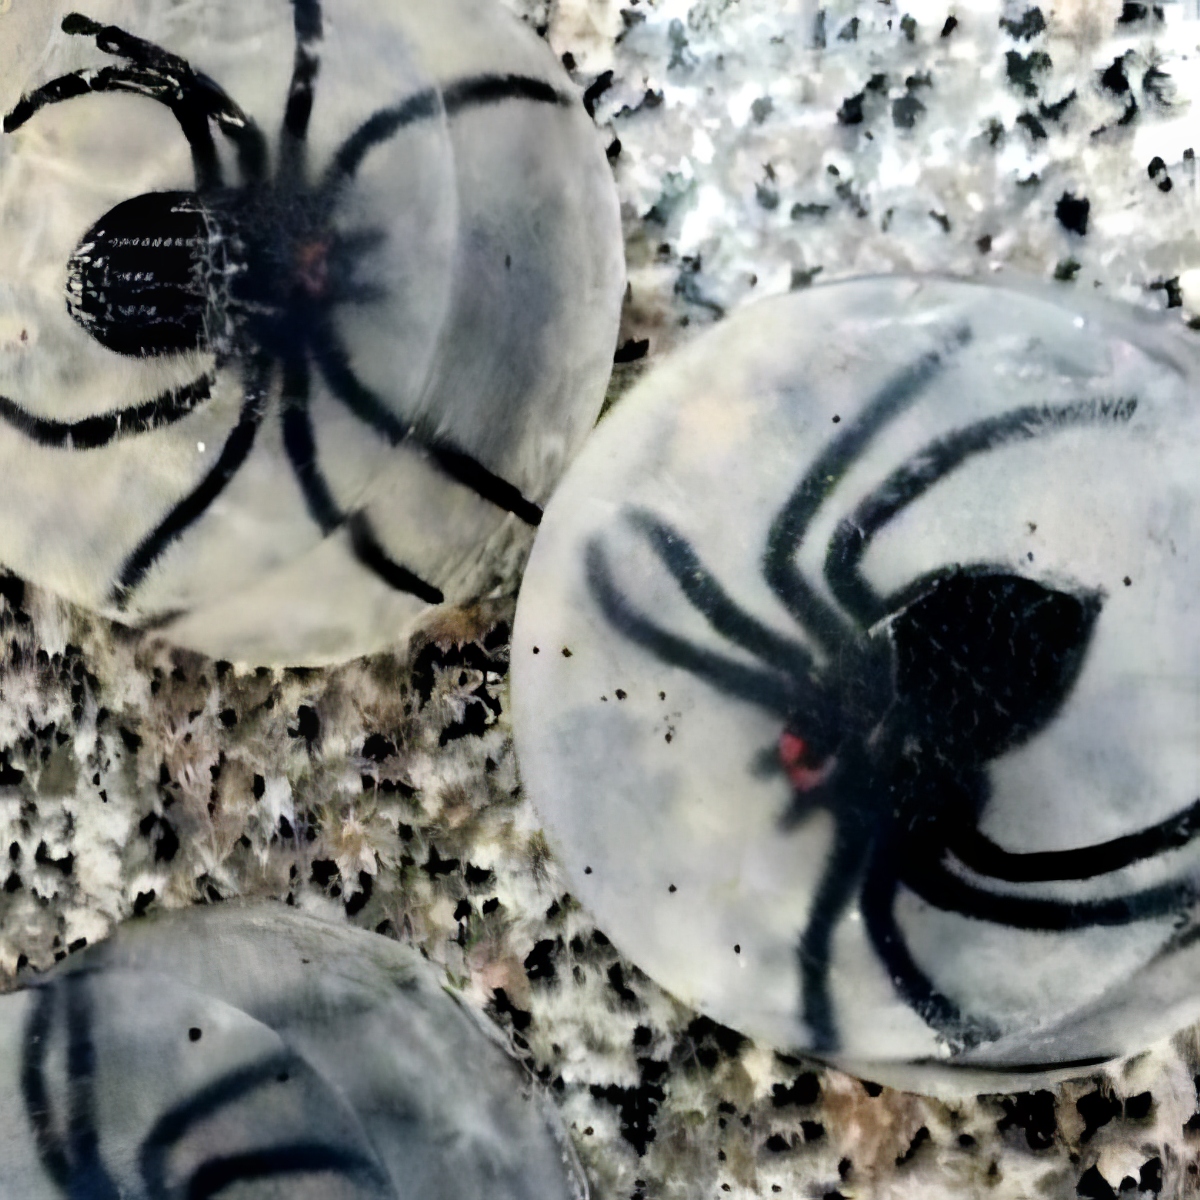 spider-soap, Fun Halloween Activities For 5-Year-Olds